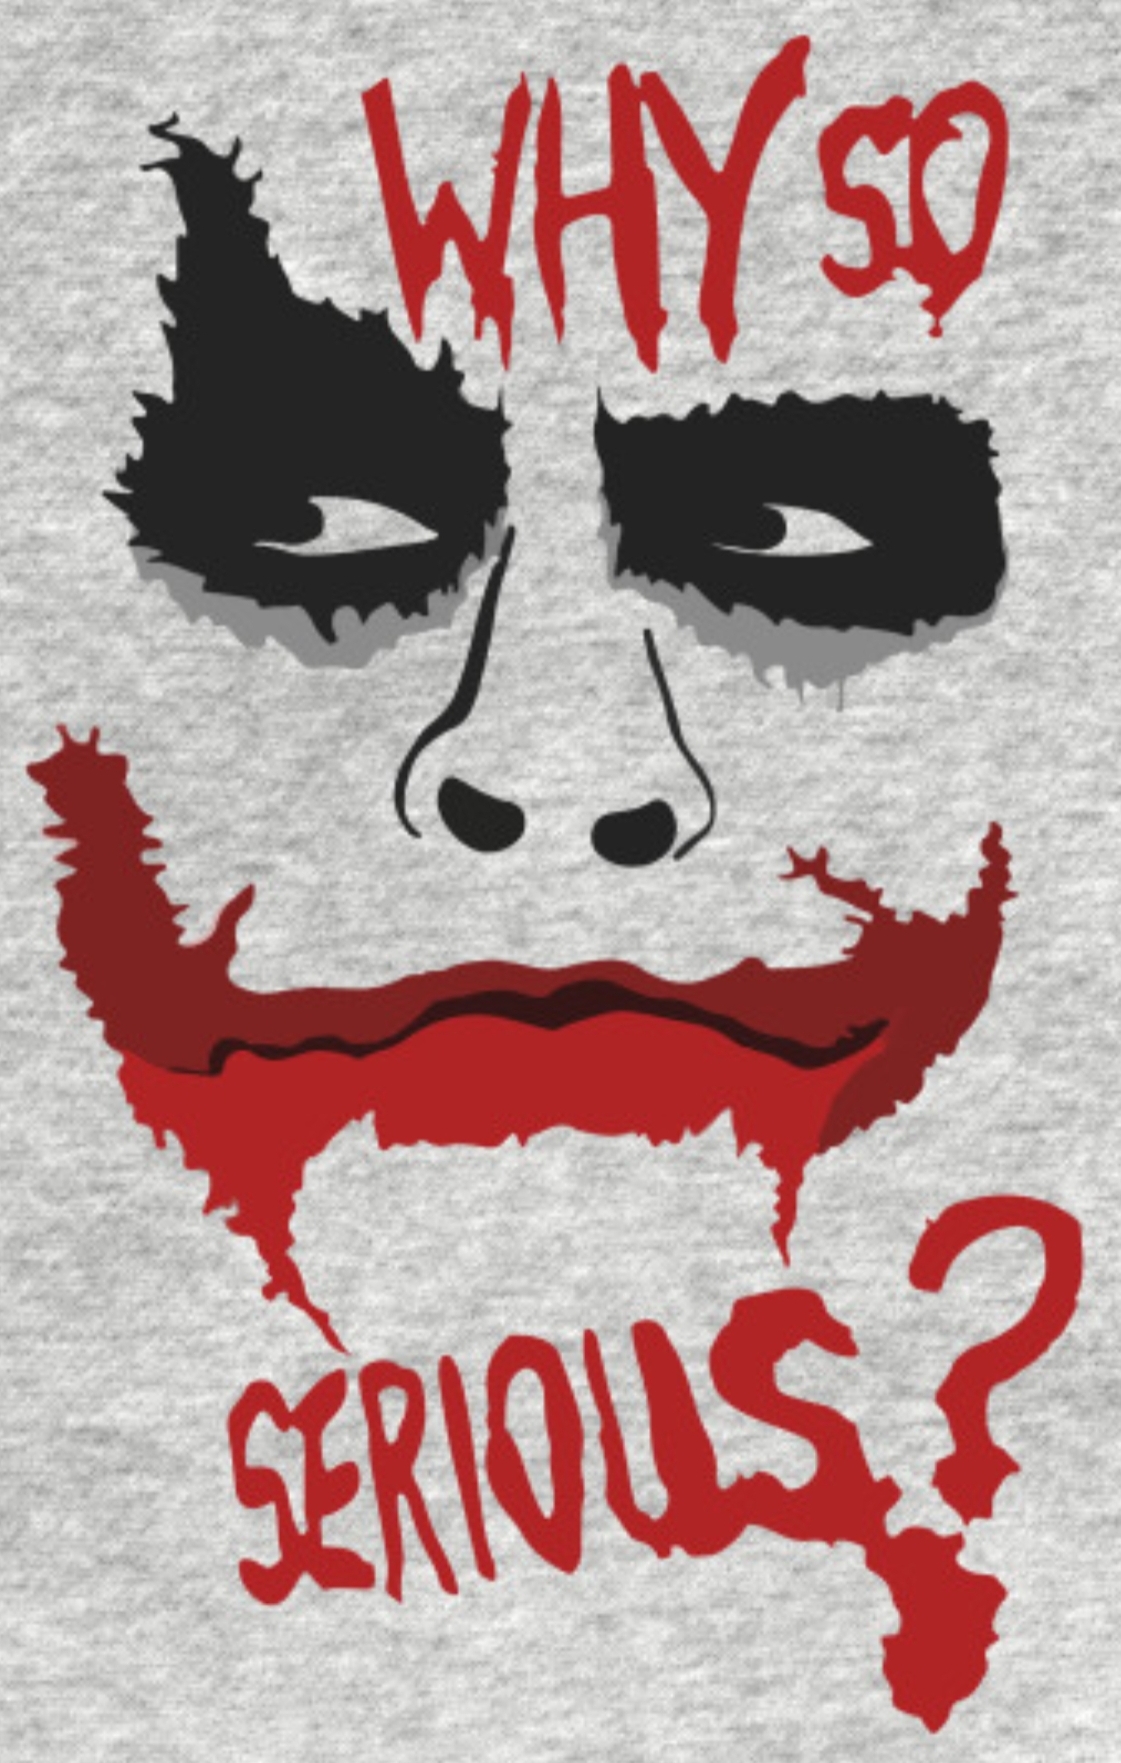 Why do serious. Why so serious надпись. Why so serious Джокер вектор. Джокер хит Леджер why so serious.